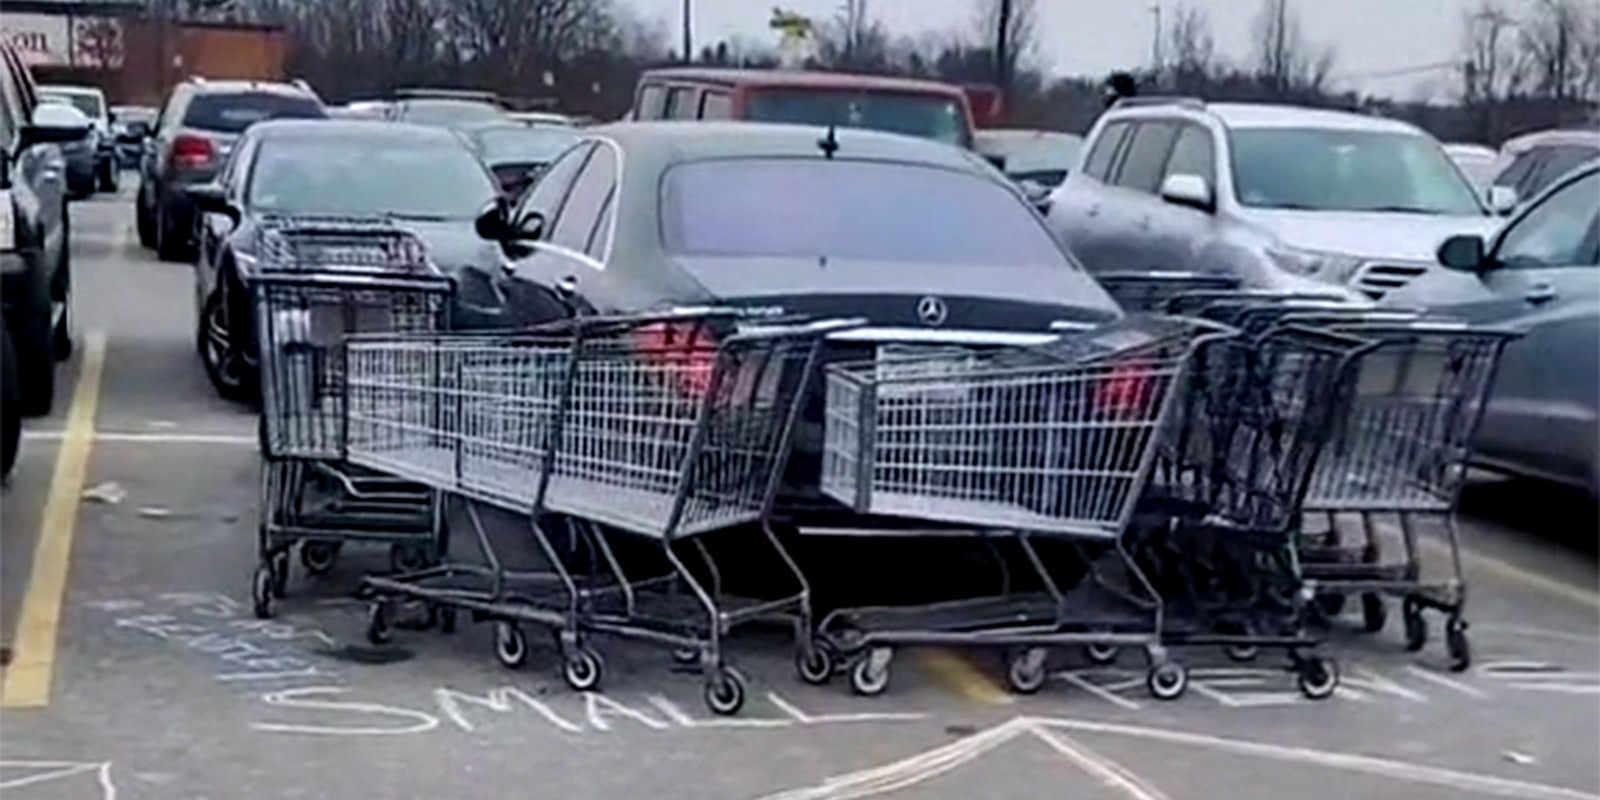 car taking up two spaces surrounded by shopping carts with 'small penis' and an arrow pointing toward the car written in chalk on the ground